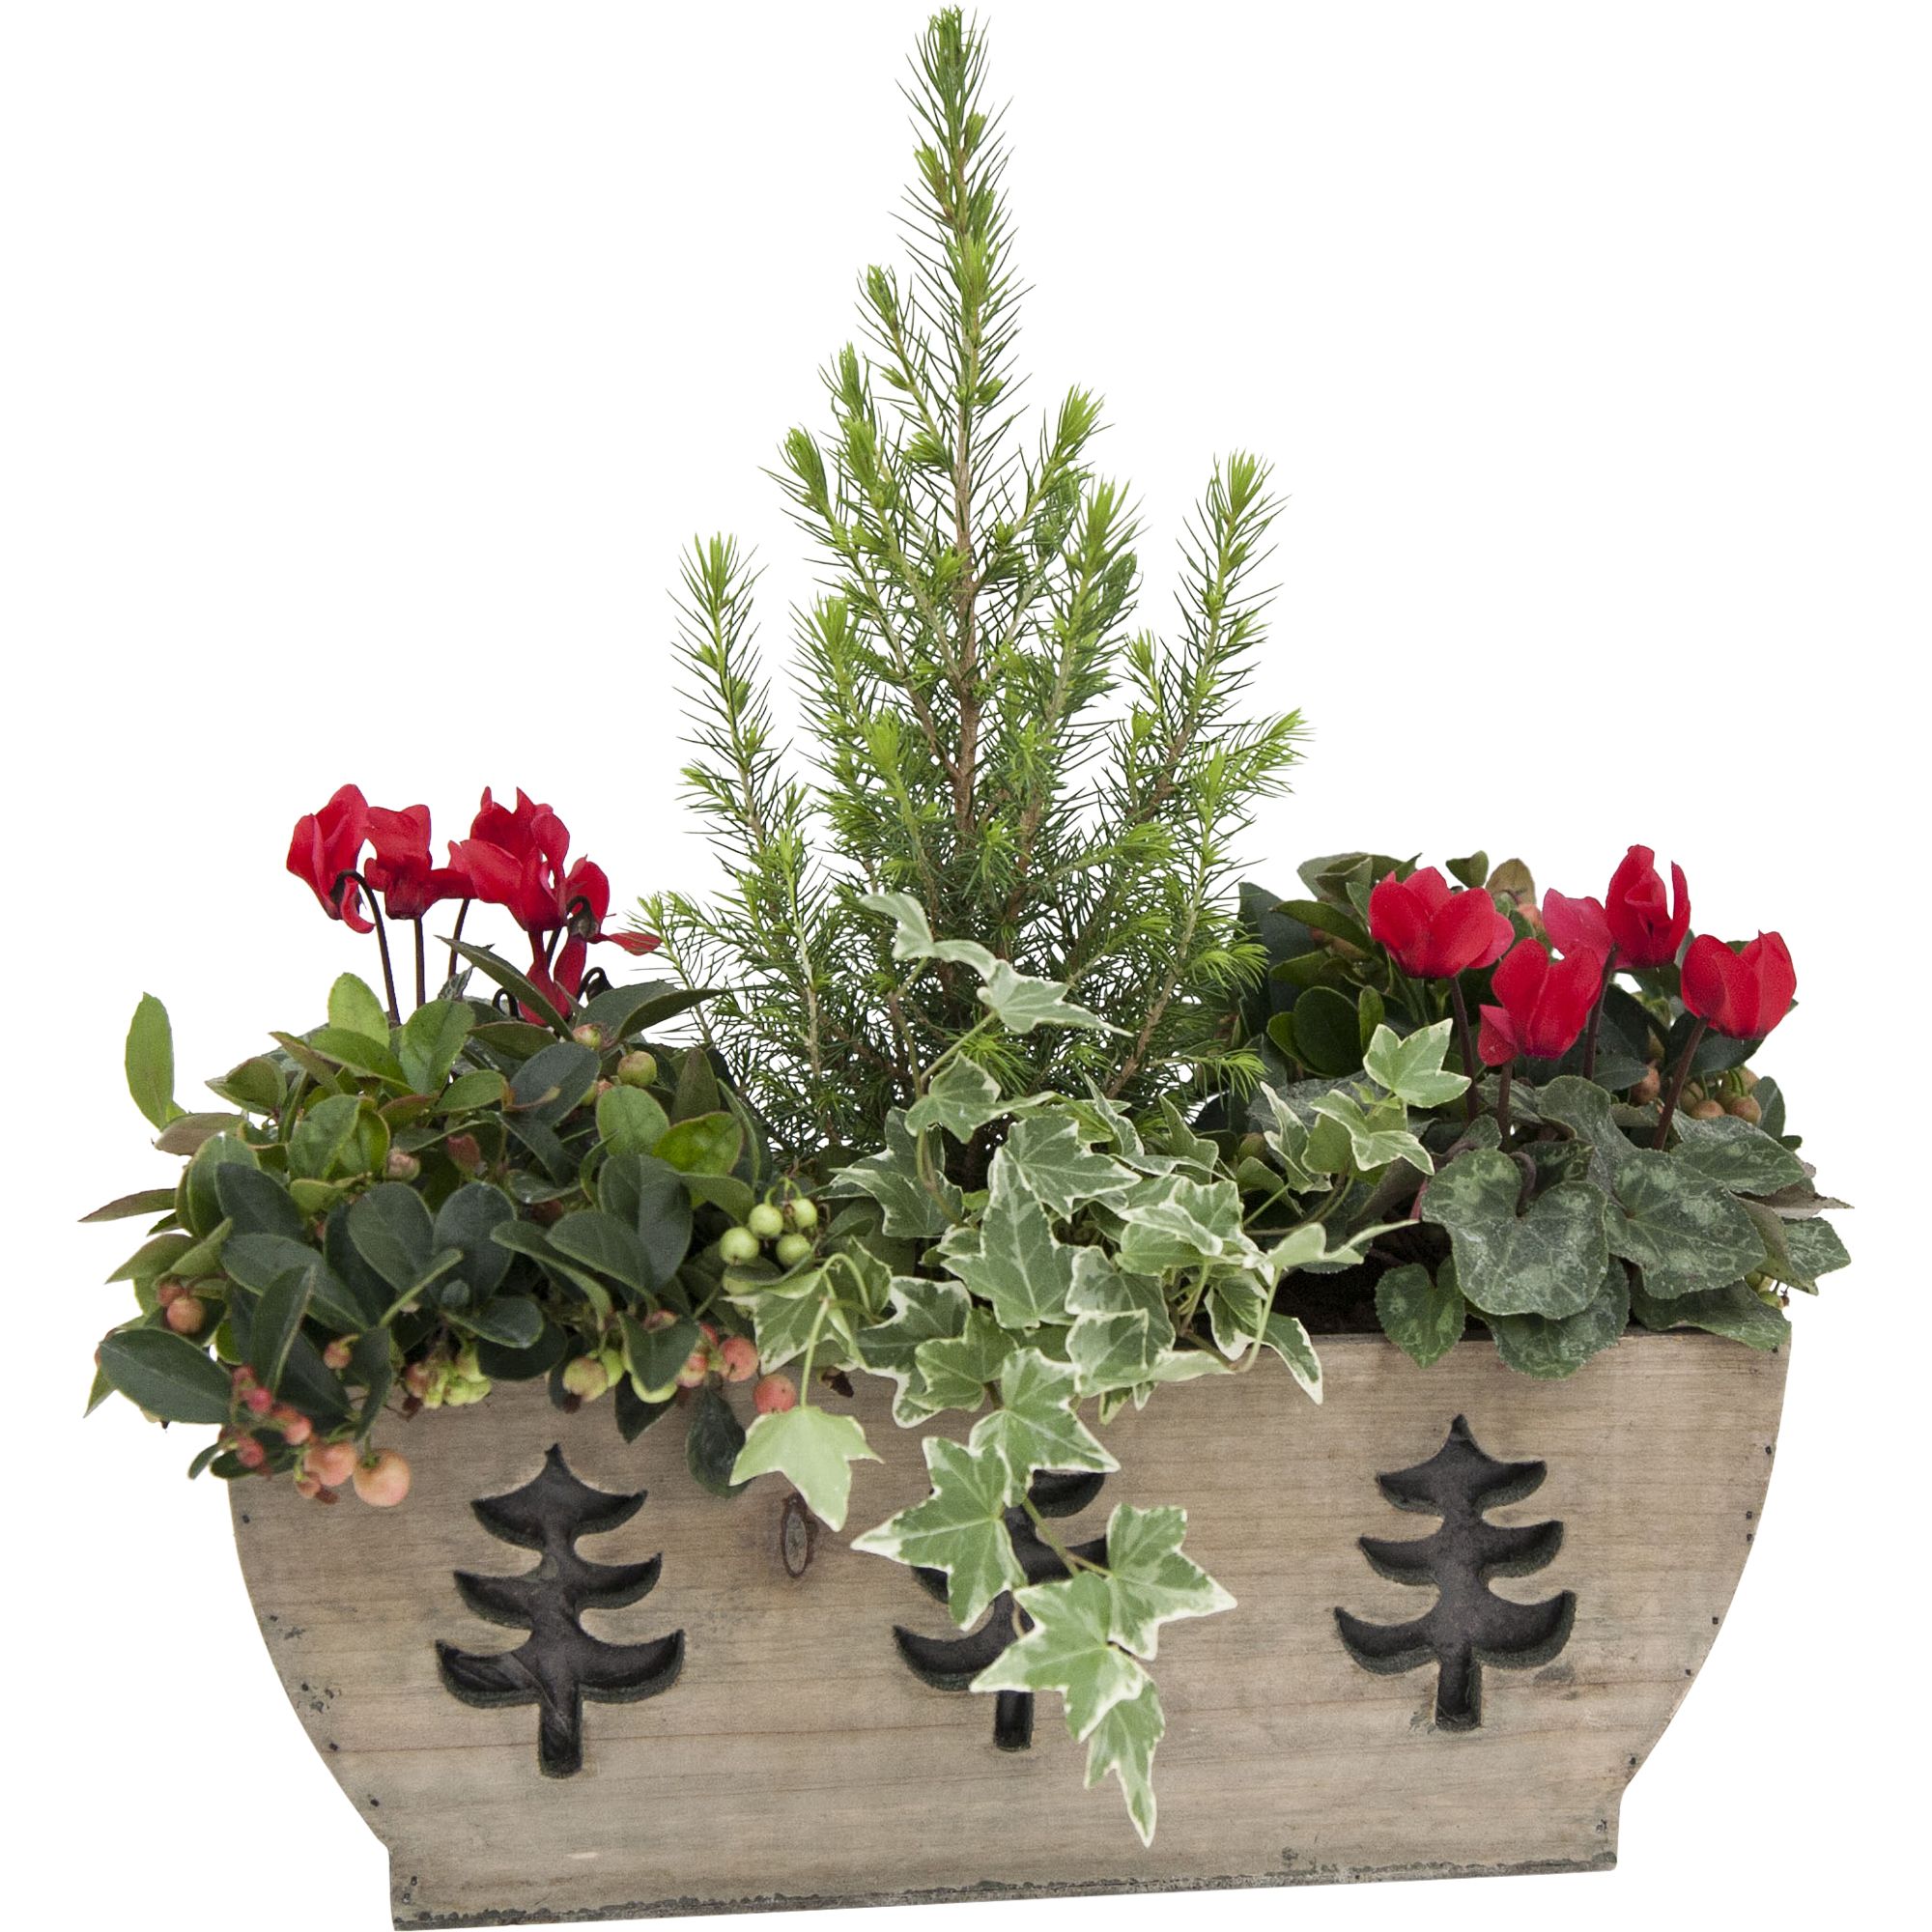 WOODEN PLANTER WITH TREES